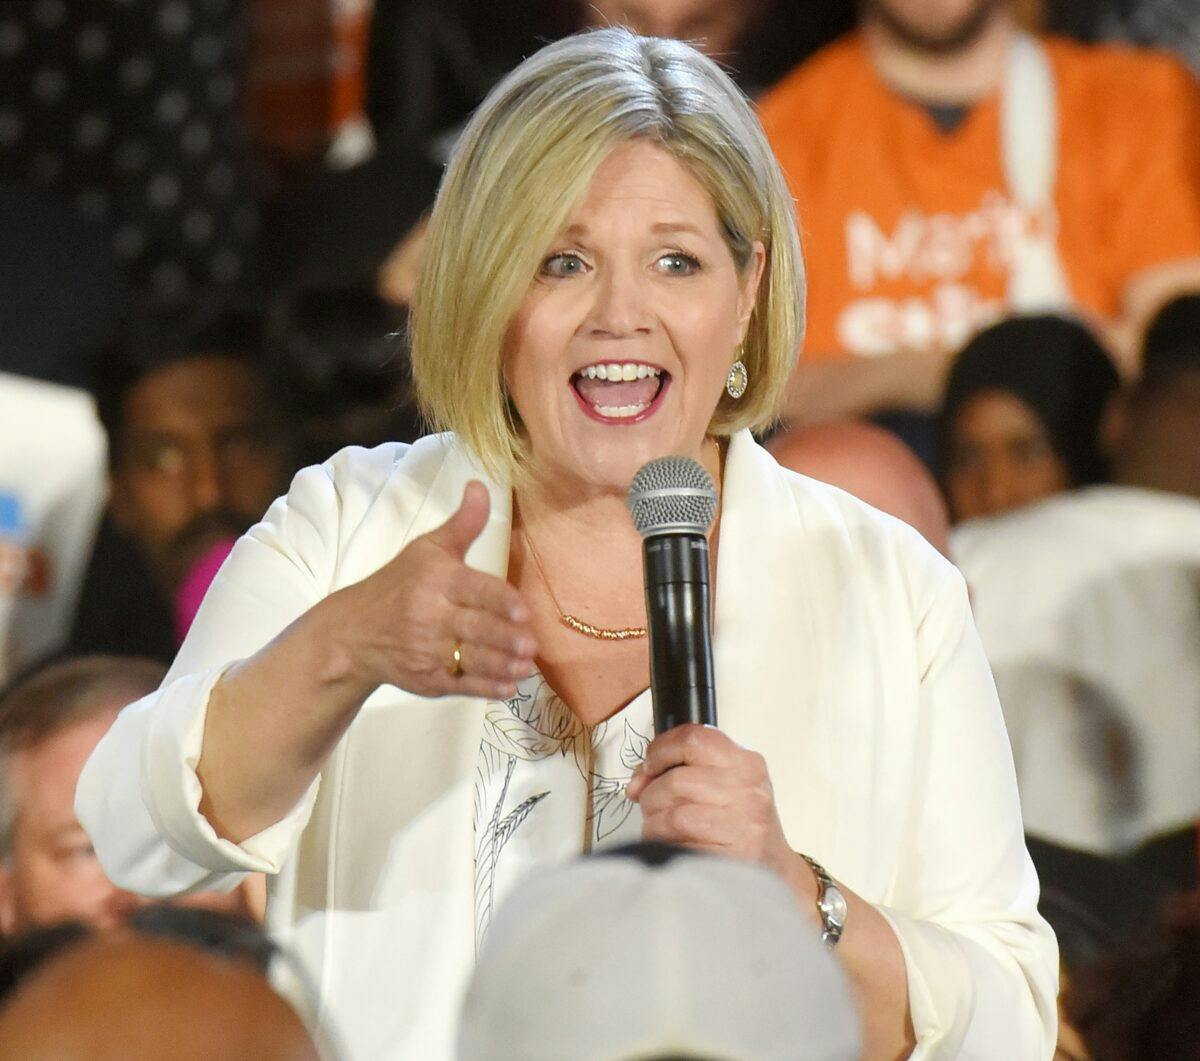 Ontario NDP lays out environment plan to revive cap-and-trade, laying groundwork for 2022 campaign